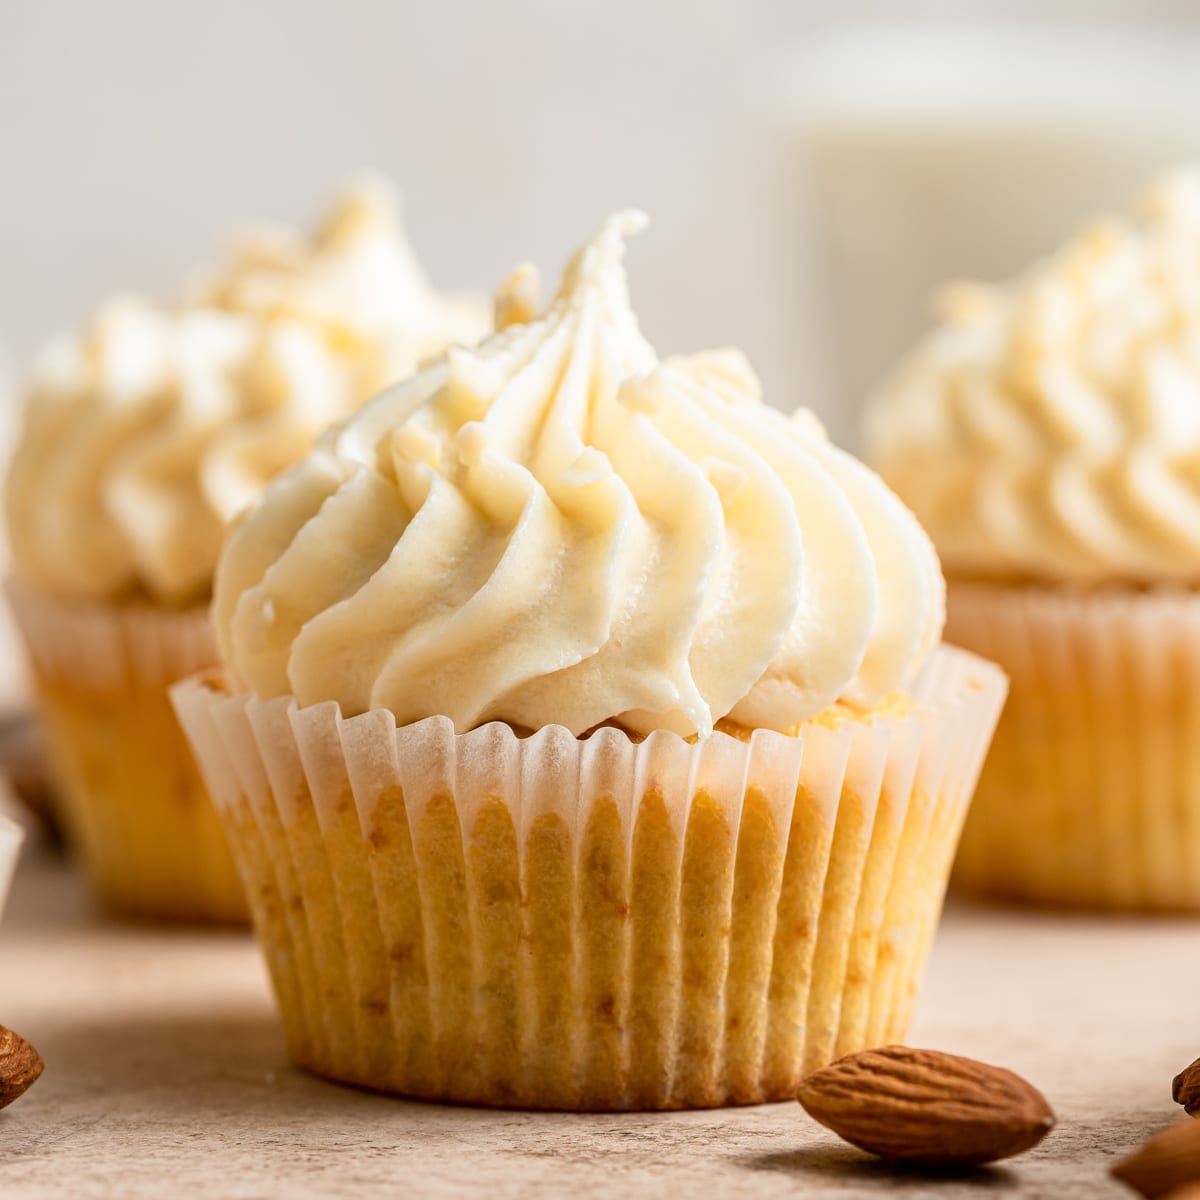 Almond Cupcakes on a wooden board.